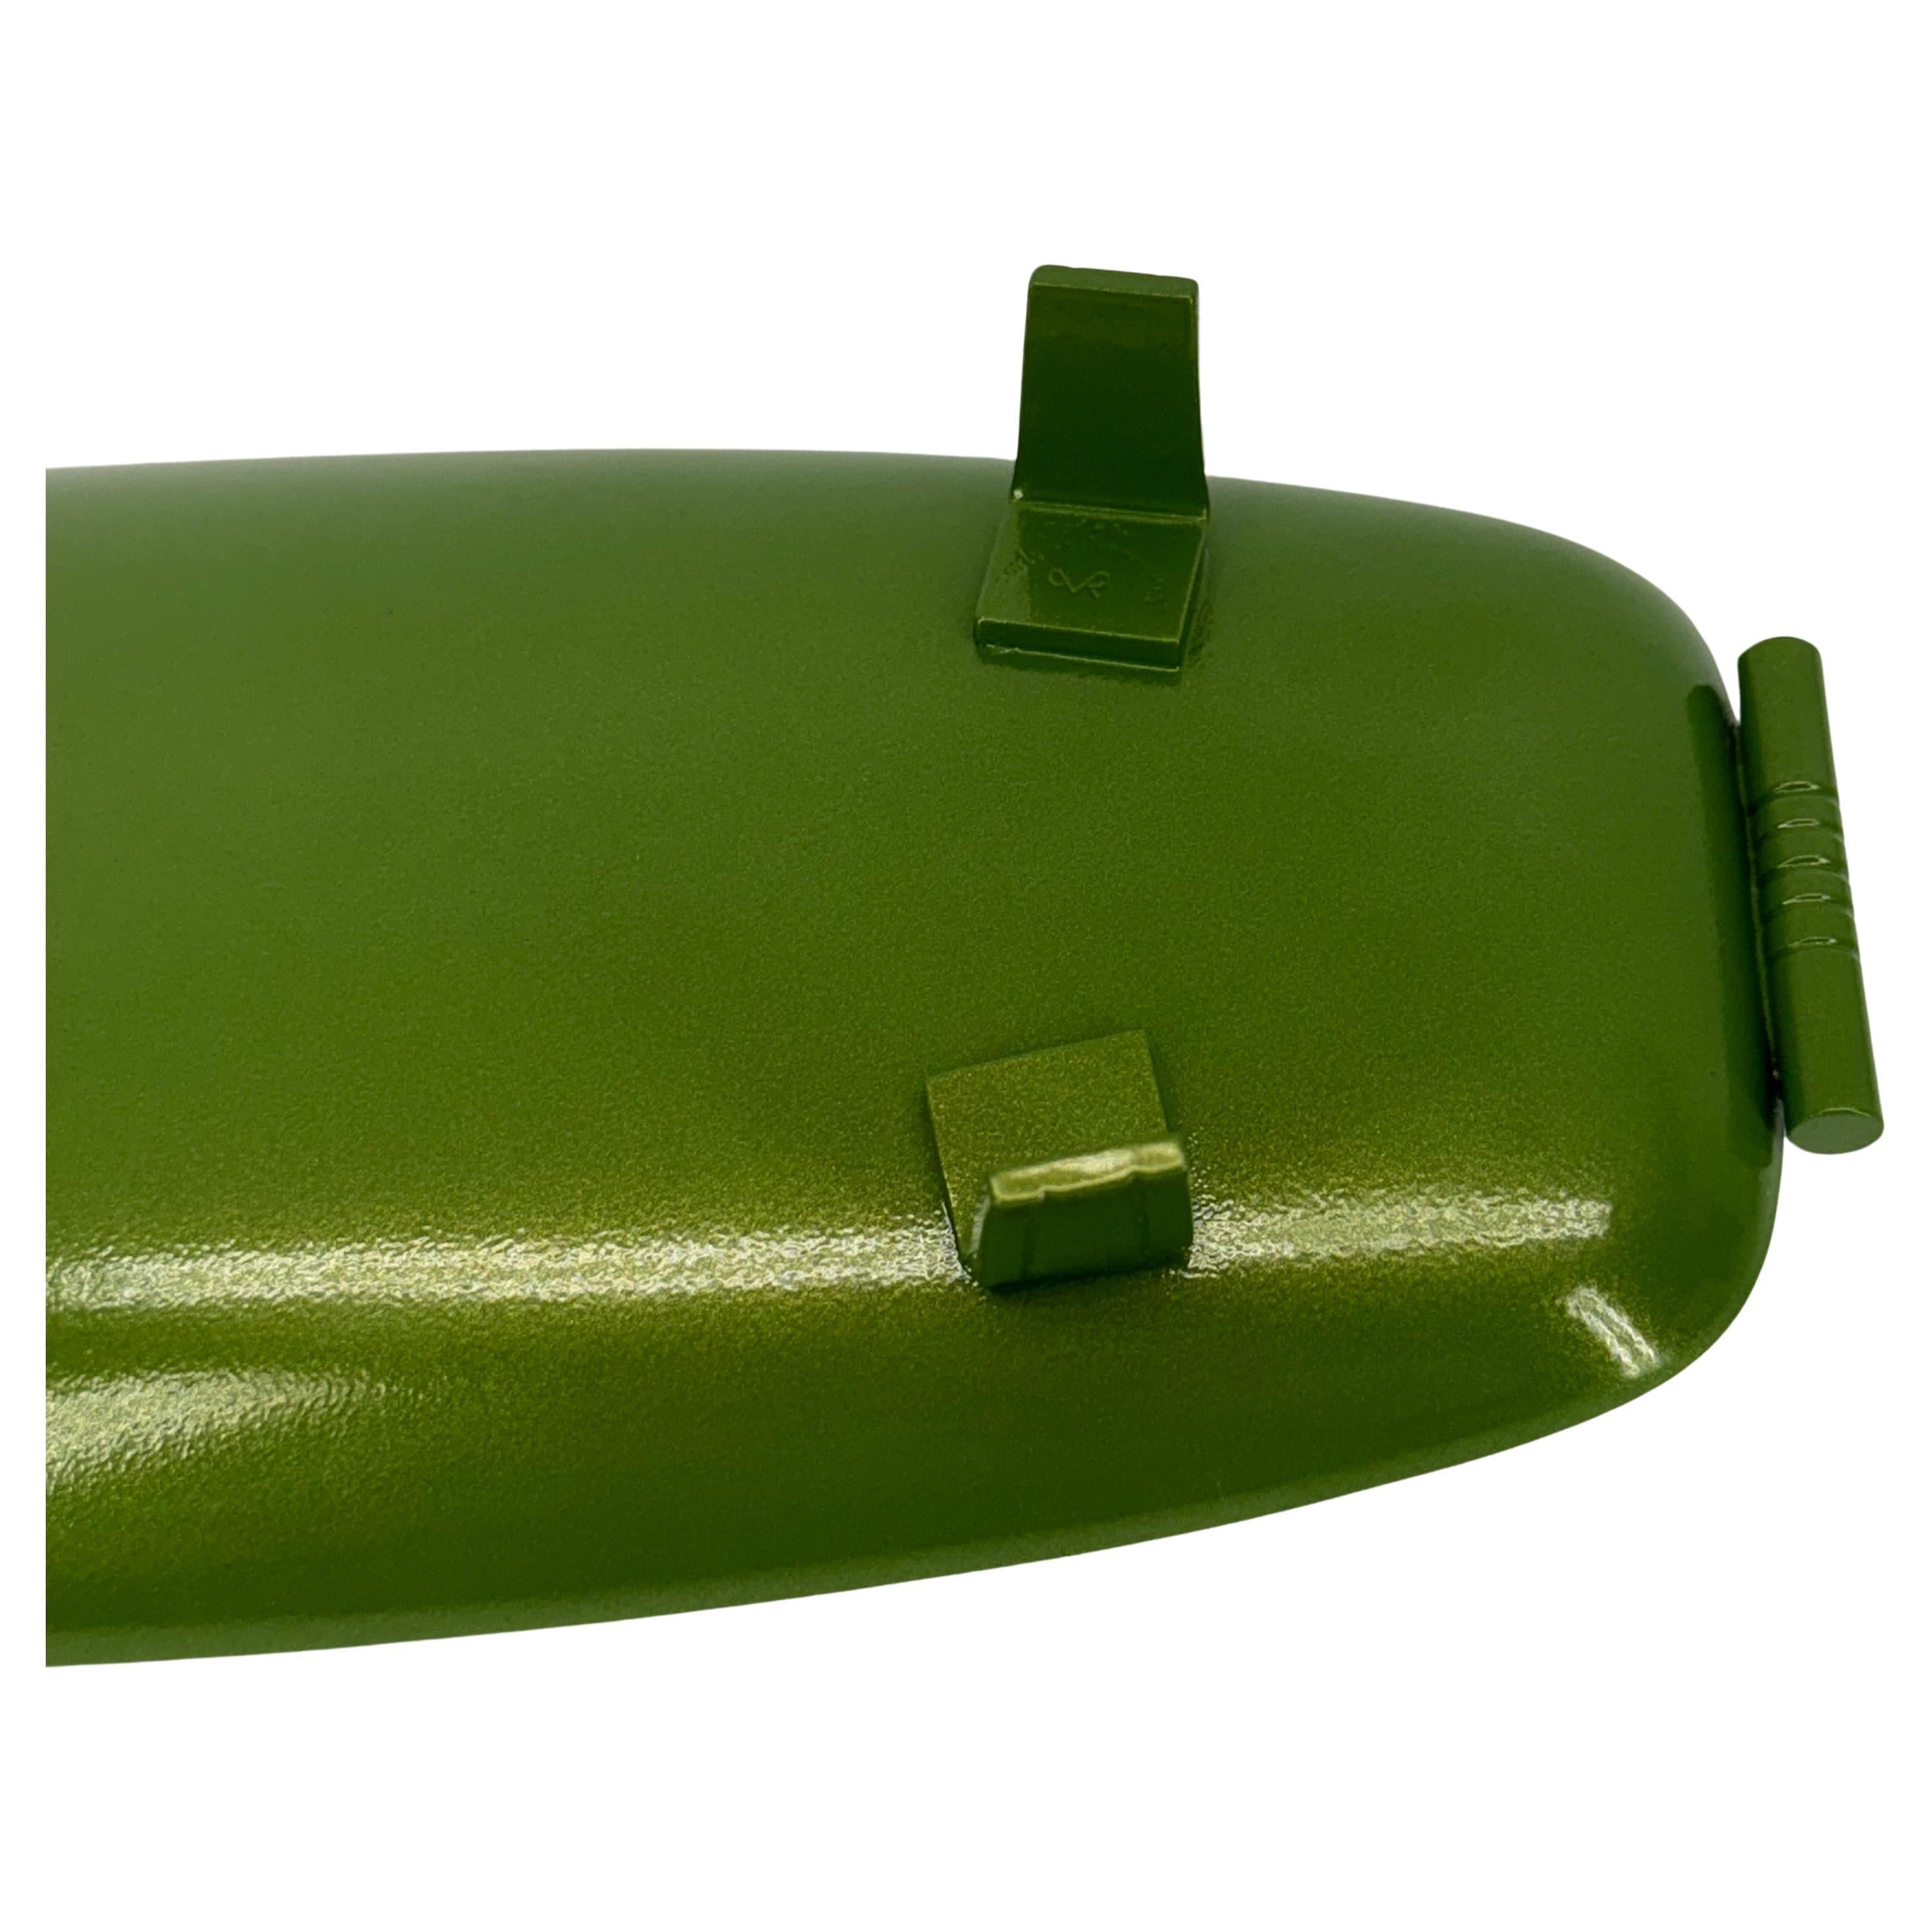 20th Century Mid-Century Modern Powder-Coated Leafy Green Metal Tray or Dish For Sale